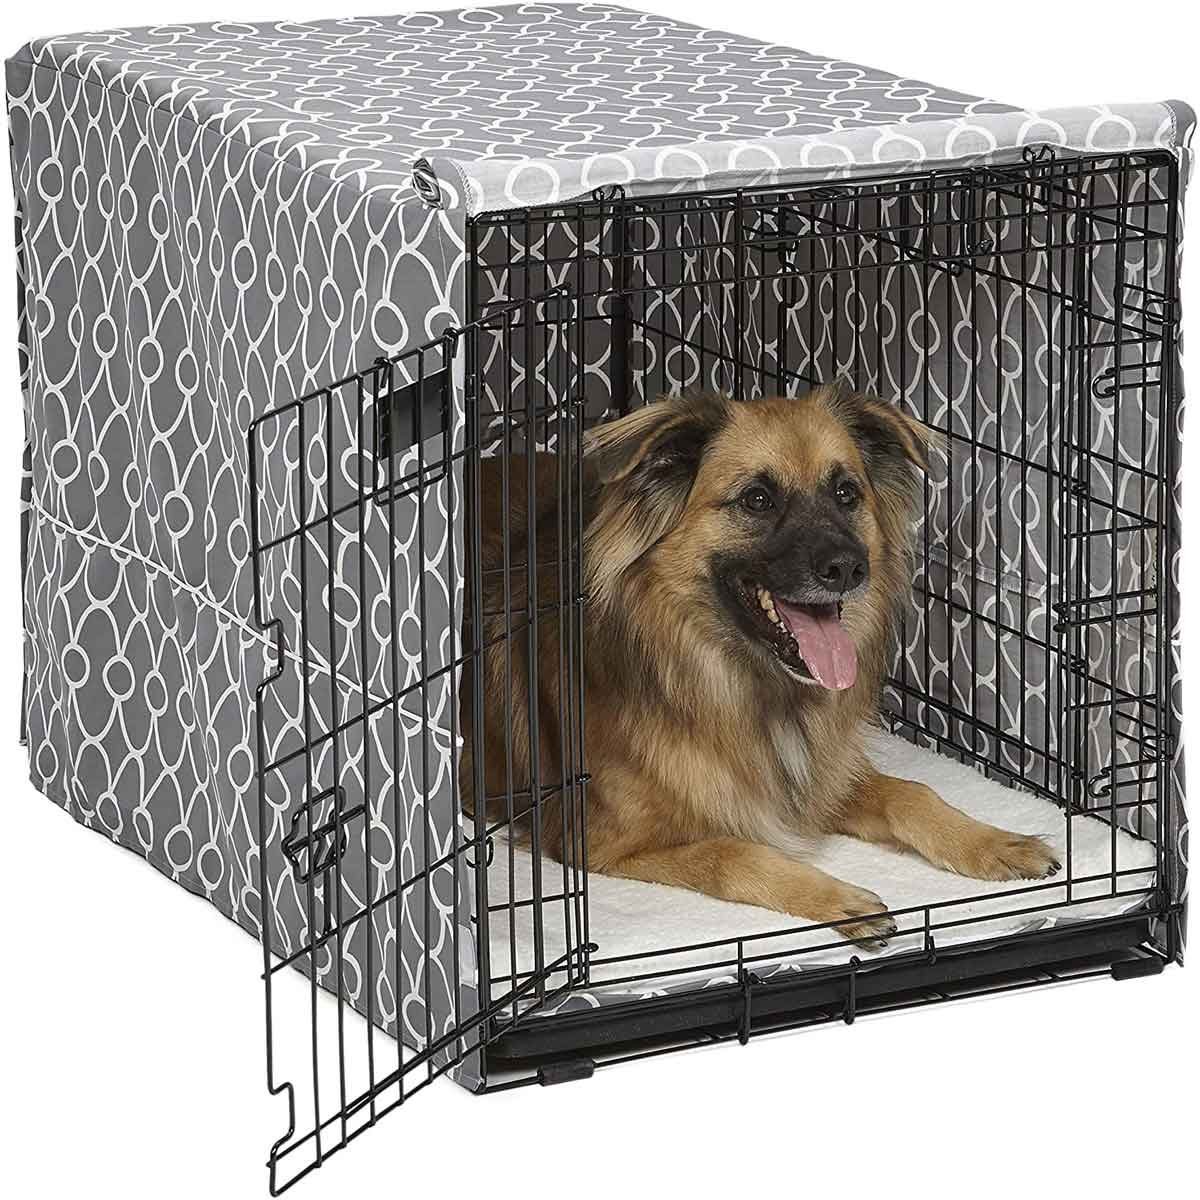  Lick Mat for Dogs Crate Training Aids for Puppies to